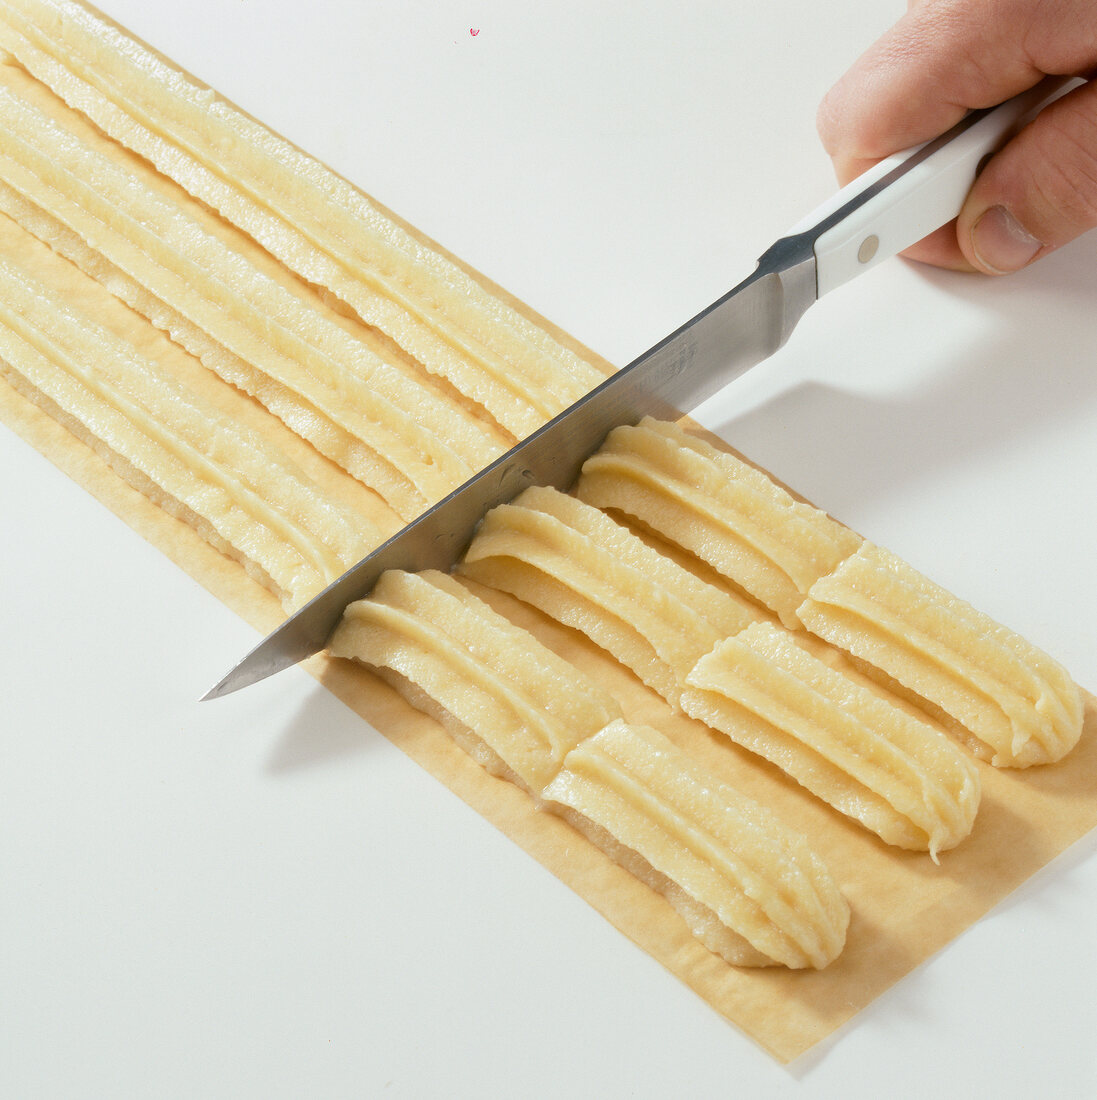 Pasta sheet topped with dough being cut into pieces